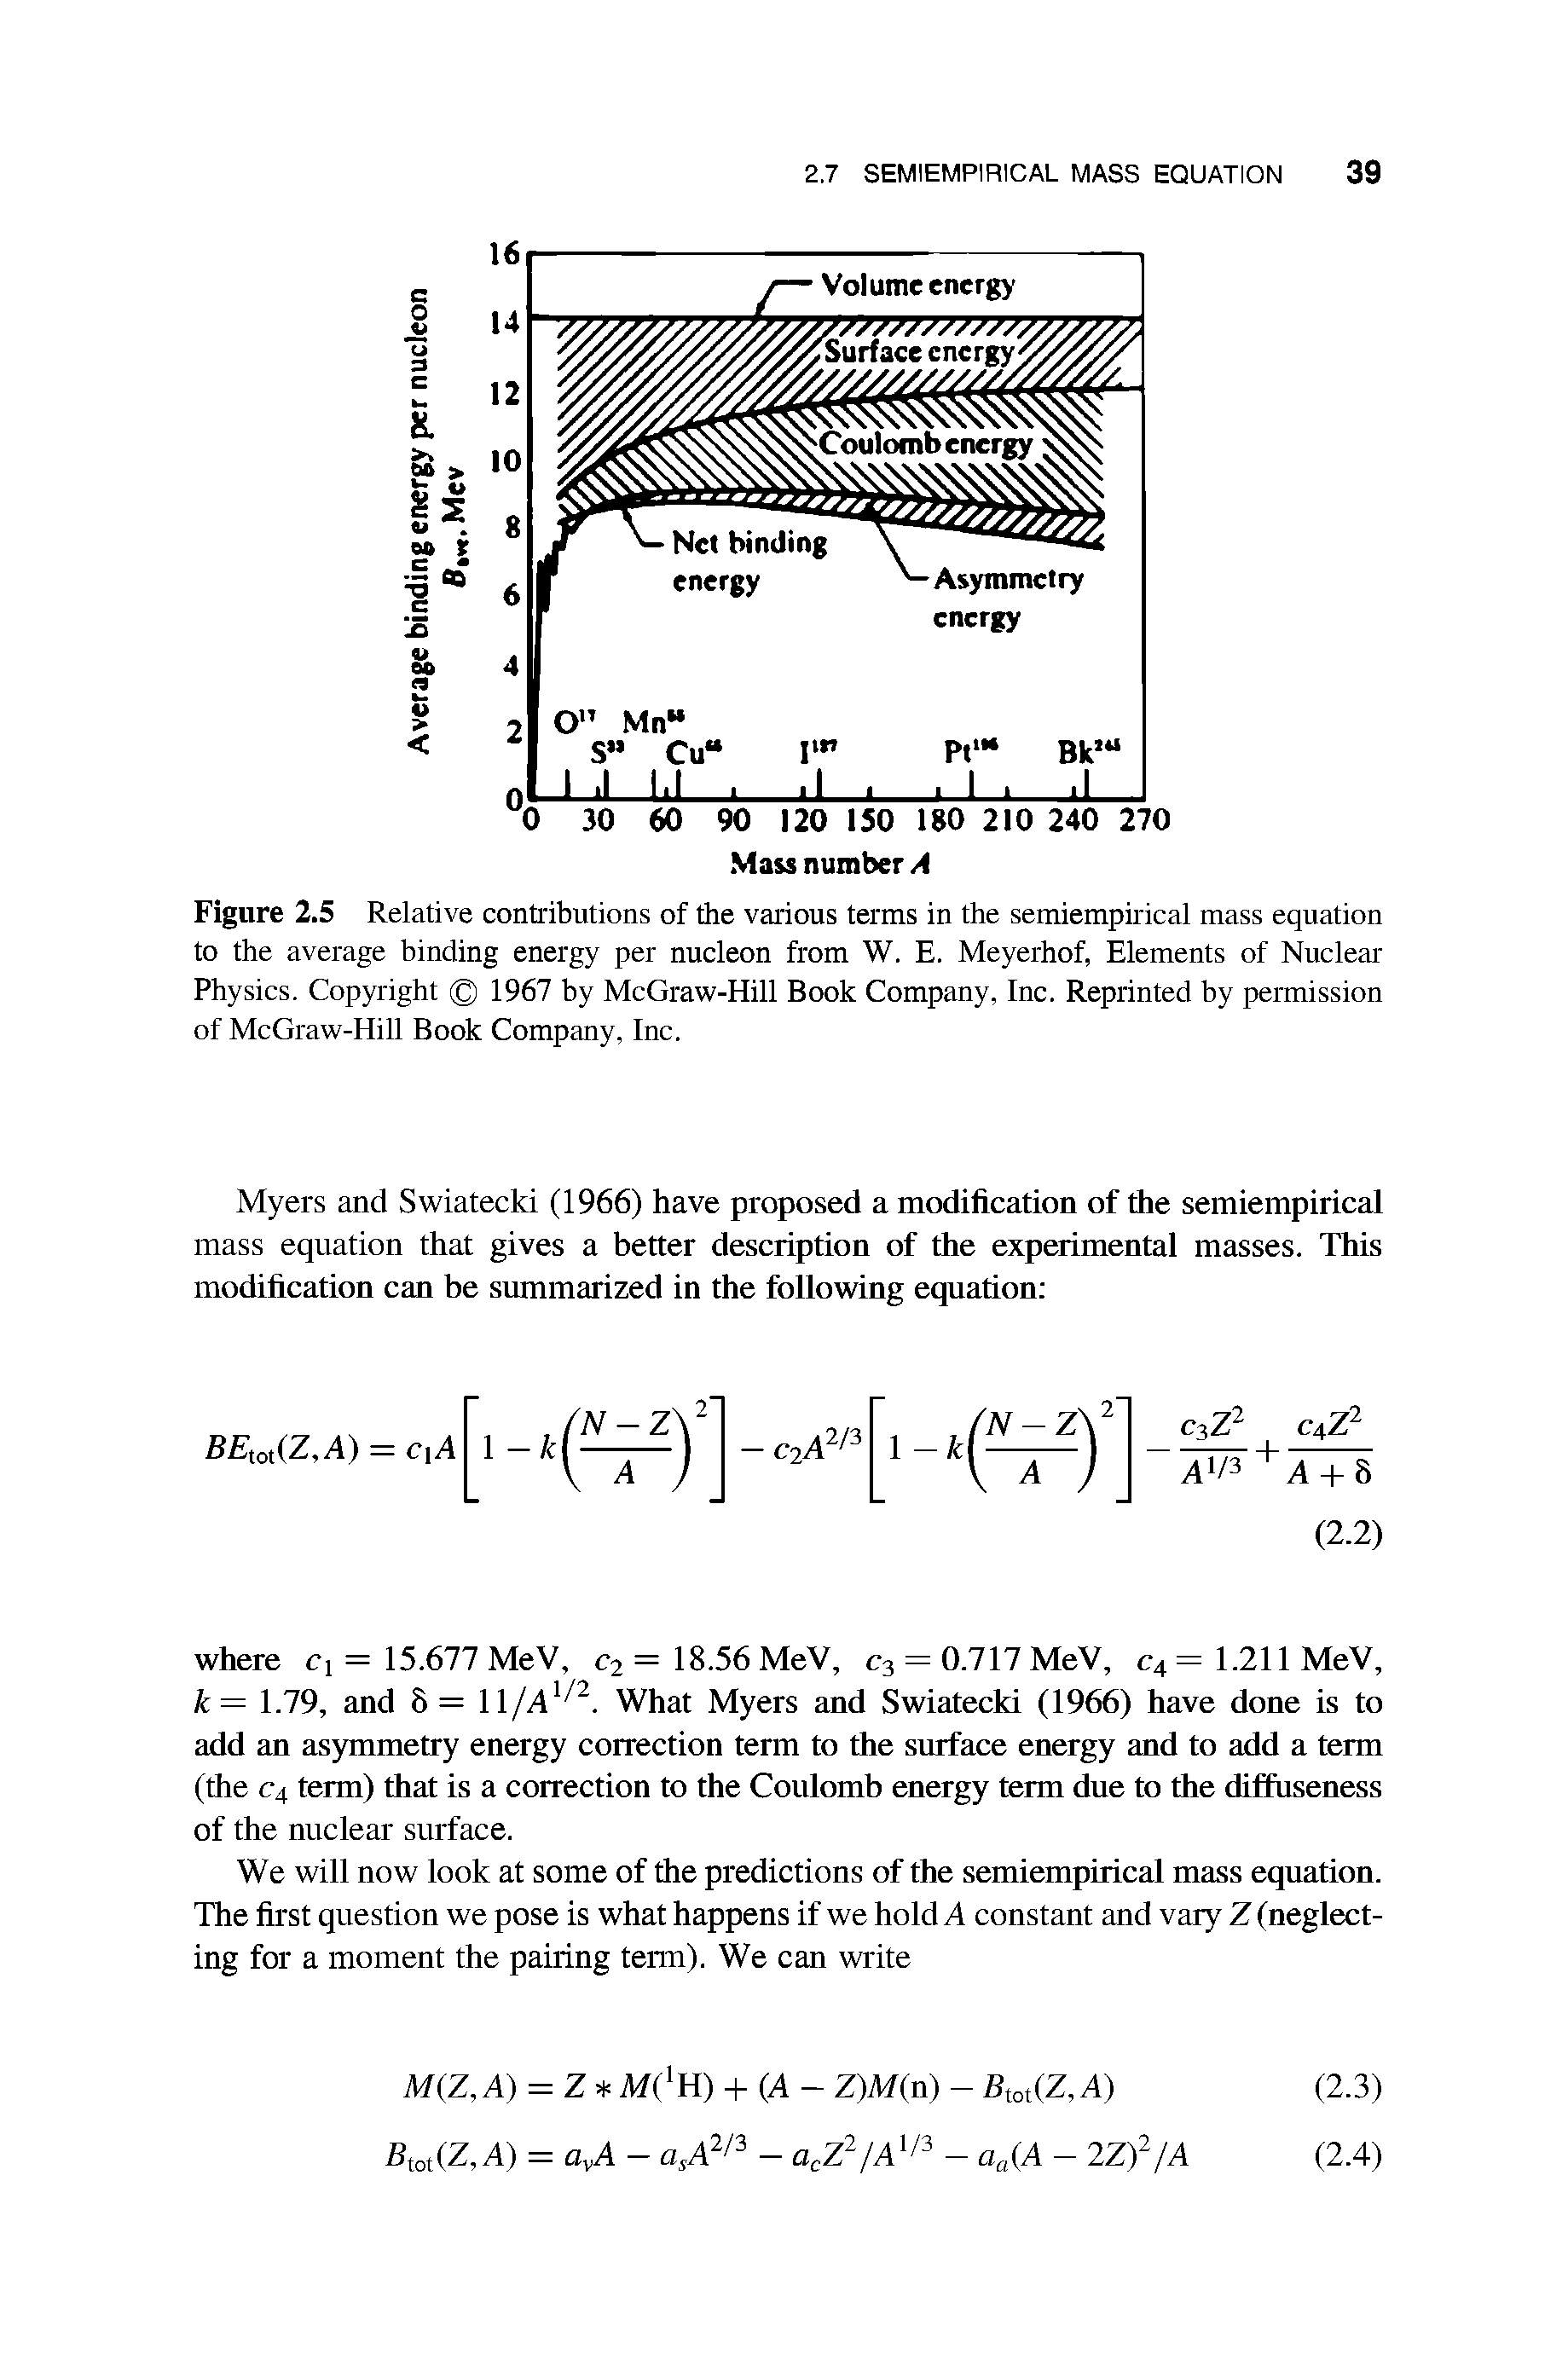 Figure 2.5 Relative contributions of the various terms in the semiempirical mass equation to the average binding energy per nucleon from W. E. Meyerhof, Elements of Nuclear Physics. Copyright 1967 by McGraw-Hill Book Company, Inc. Reprinted by permission of McGraw-Hill Book Company, Inc.